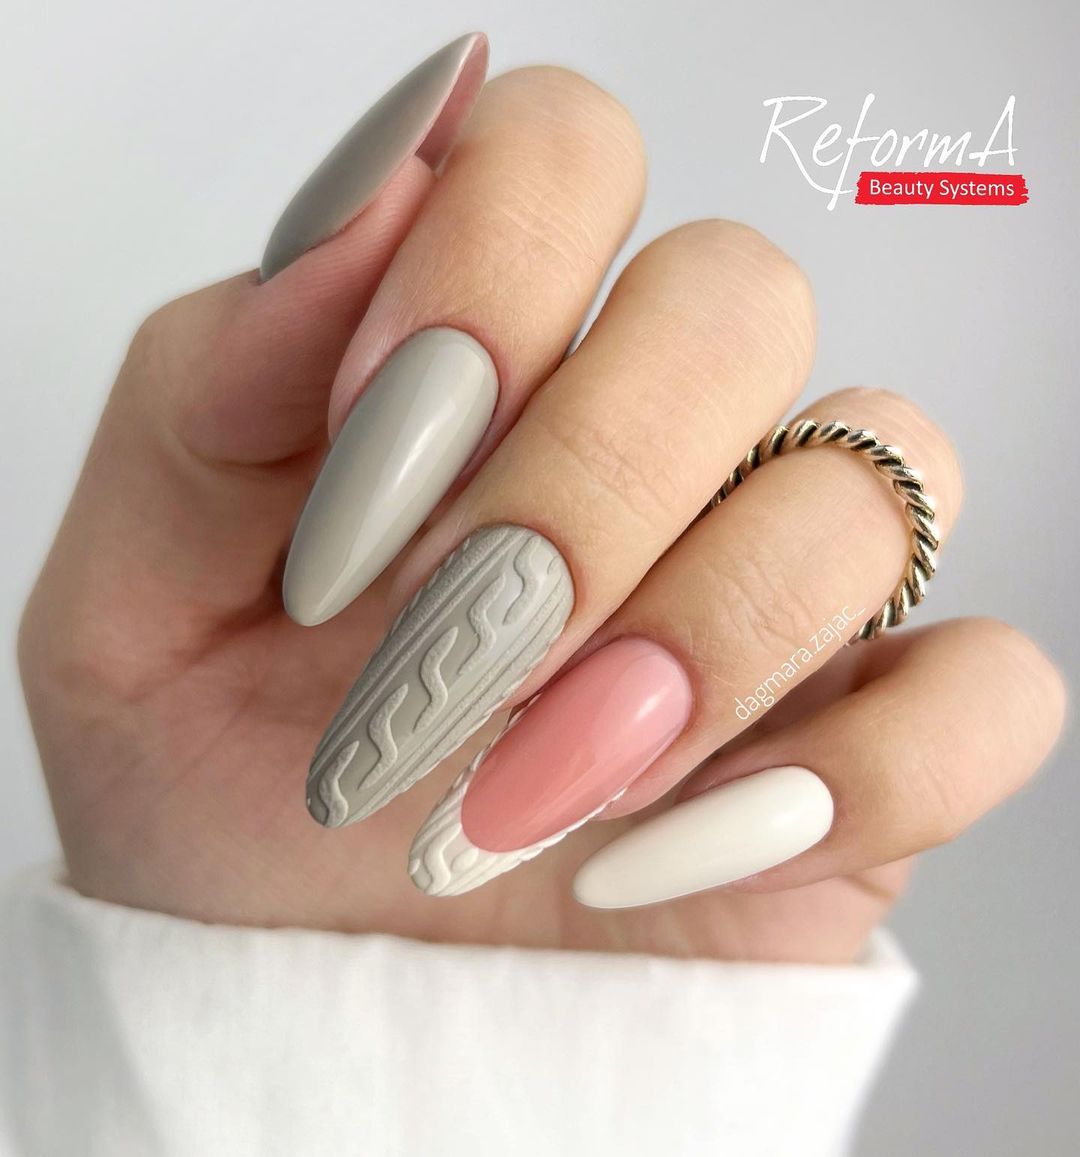 Gray Winter Sweater Design on Nails